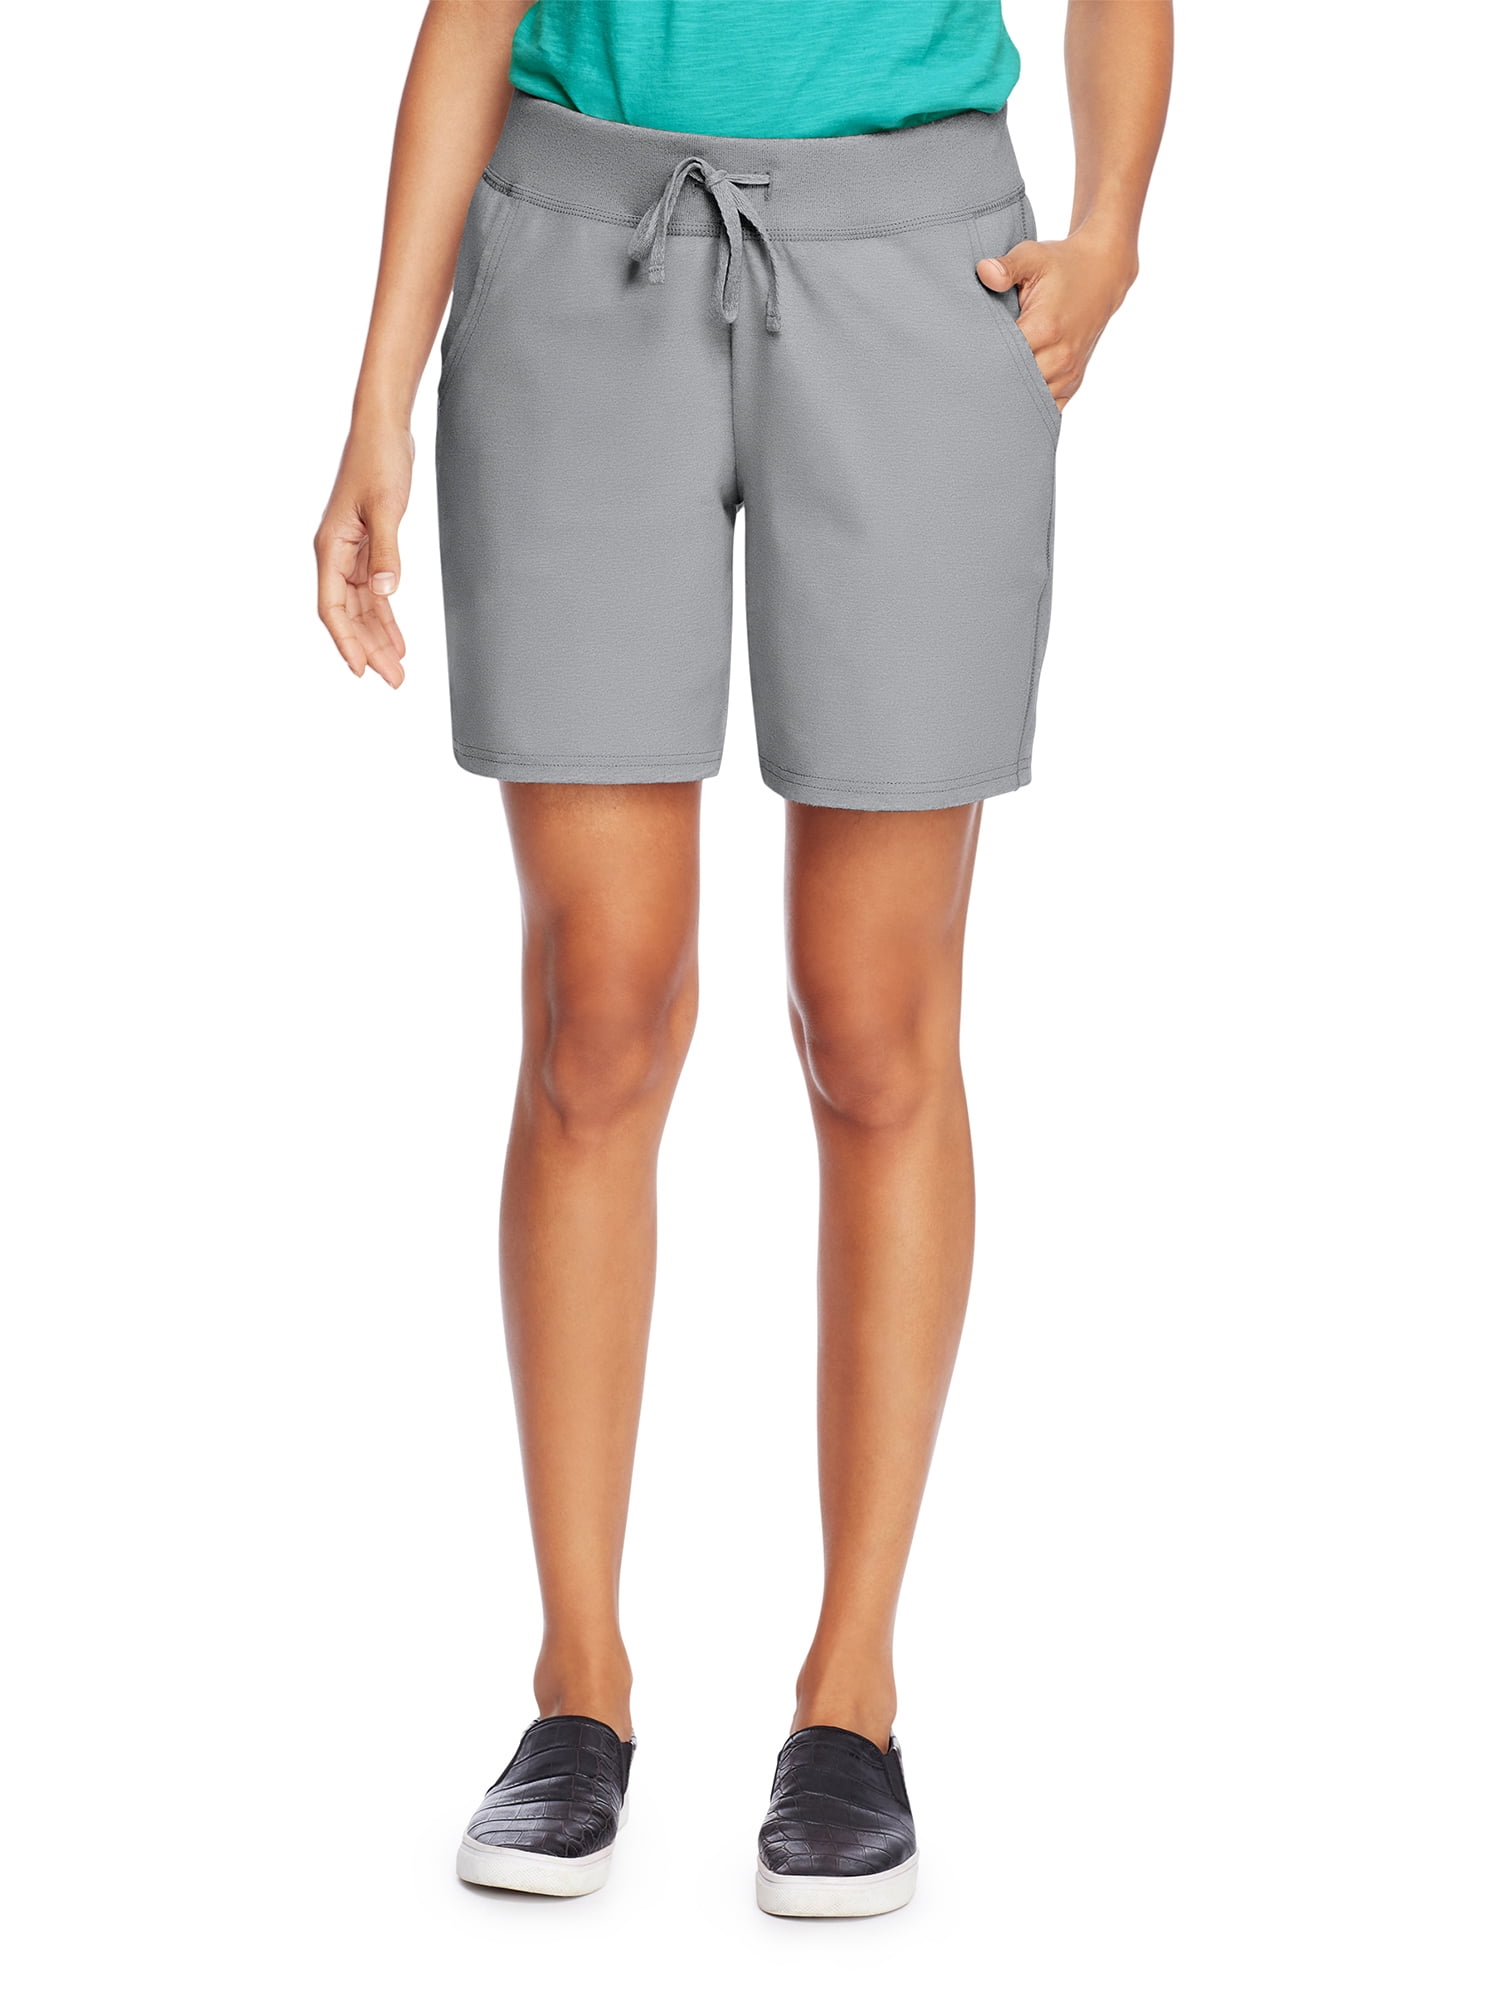 Hanes Womens Cotton Short with Pockets 